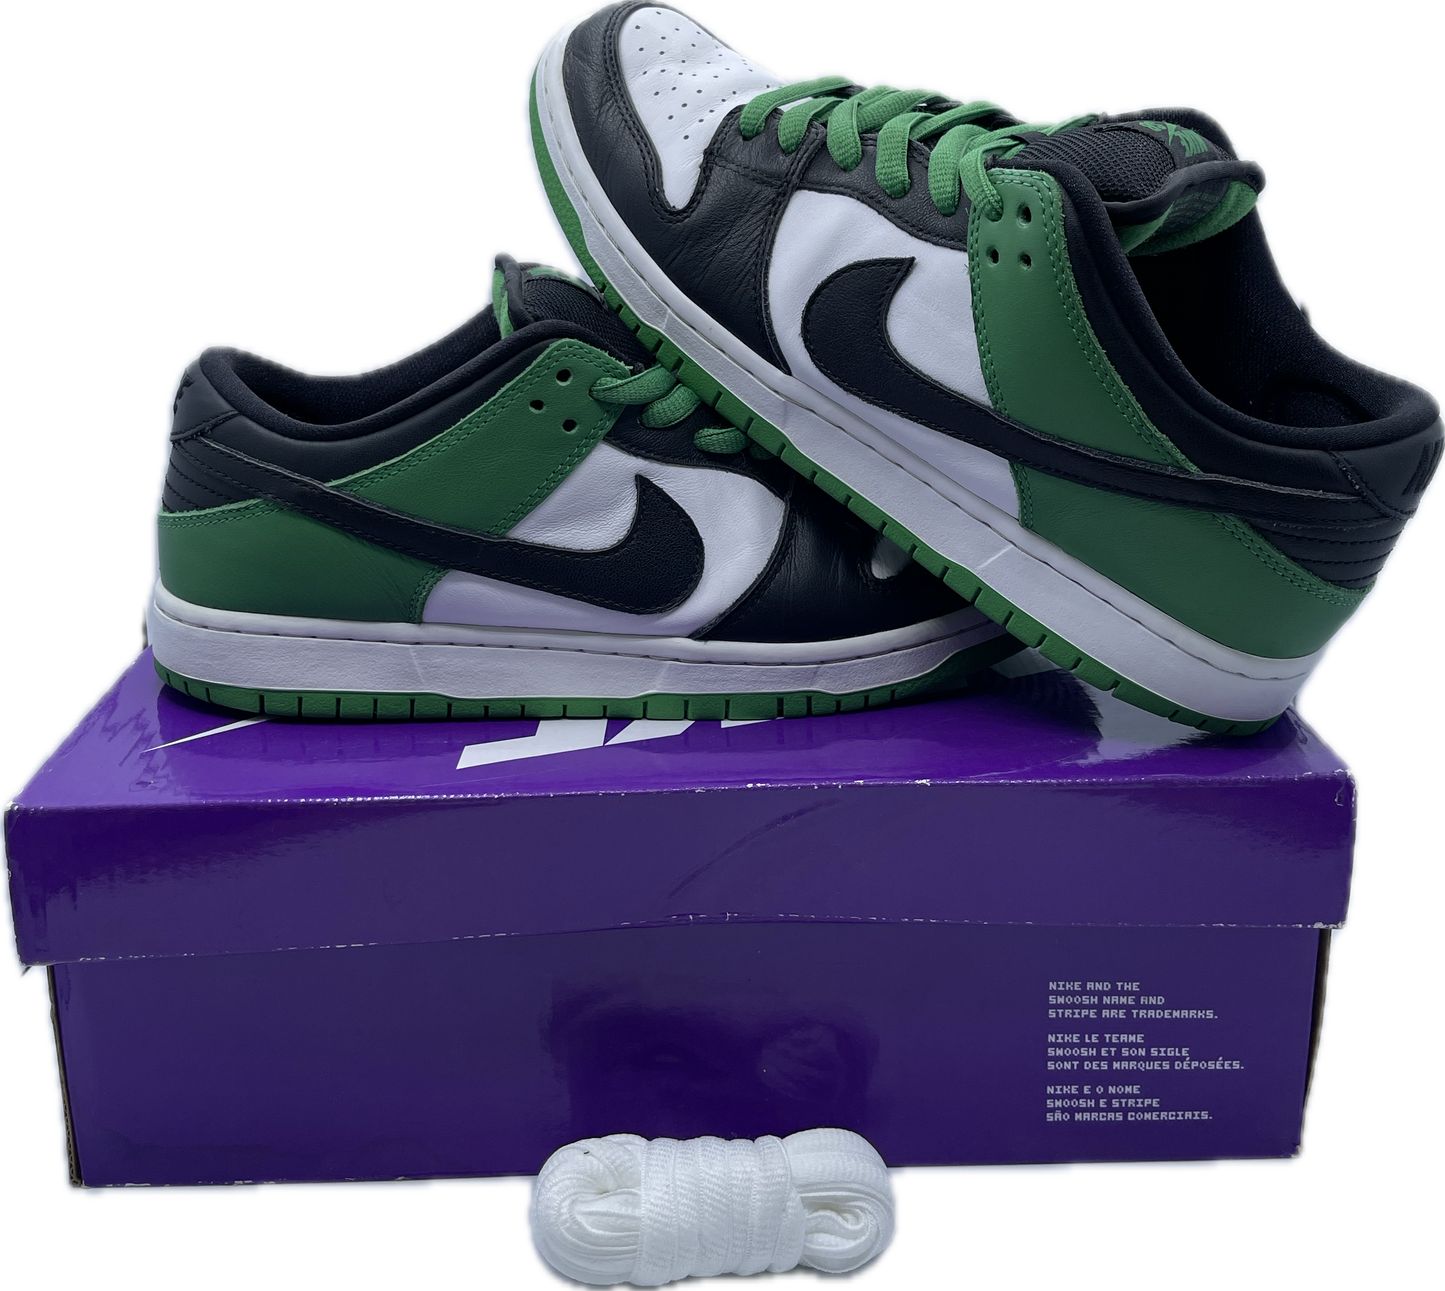 Dunk SB low Classic Green Used